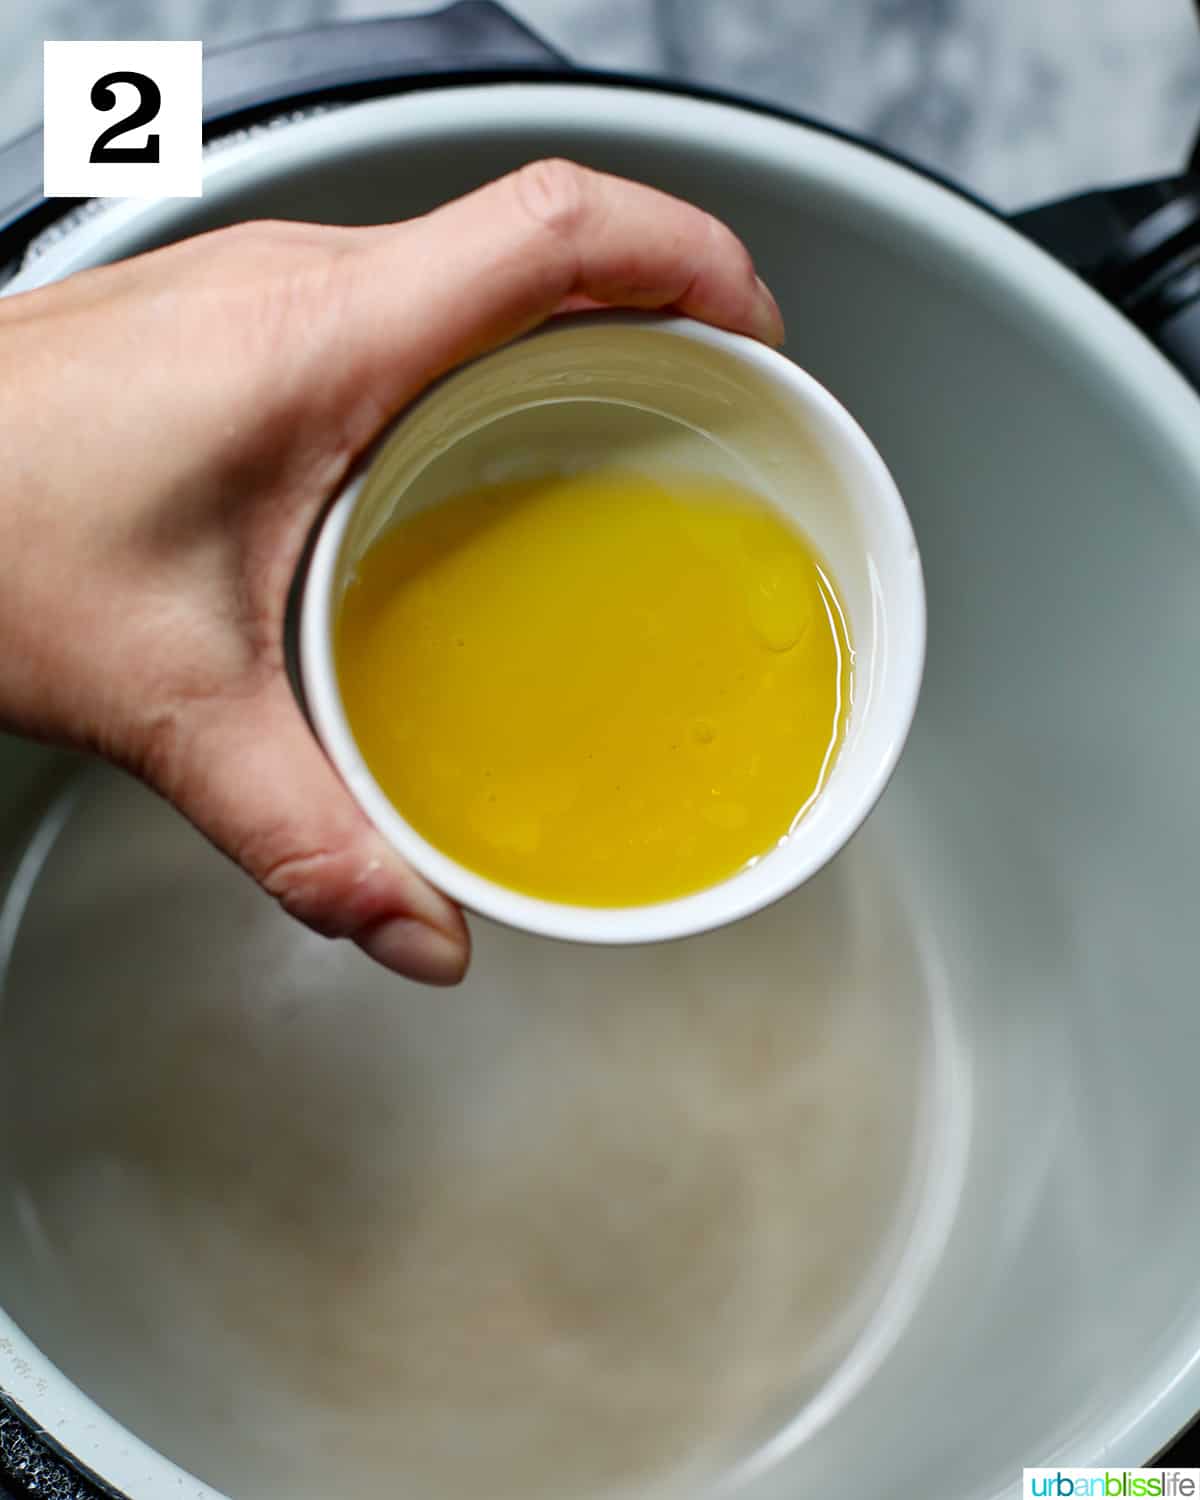 hand holding bowl of olive oil pouring into pot of a Ninja Foodi pressure cooker